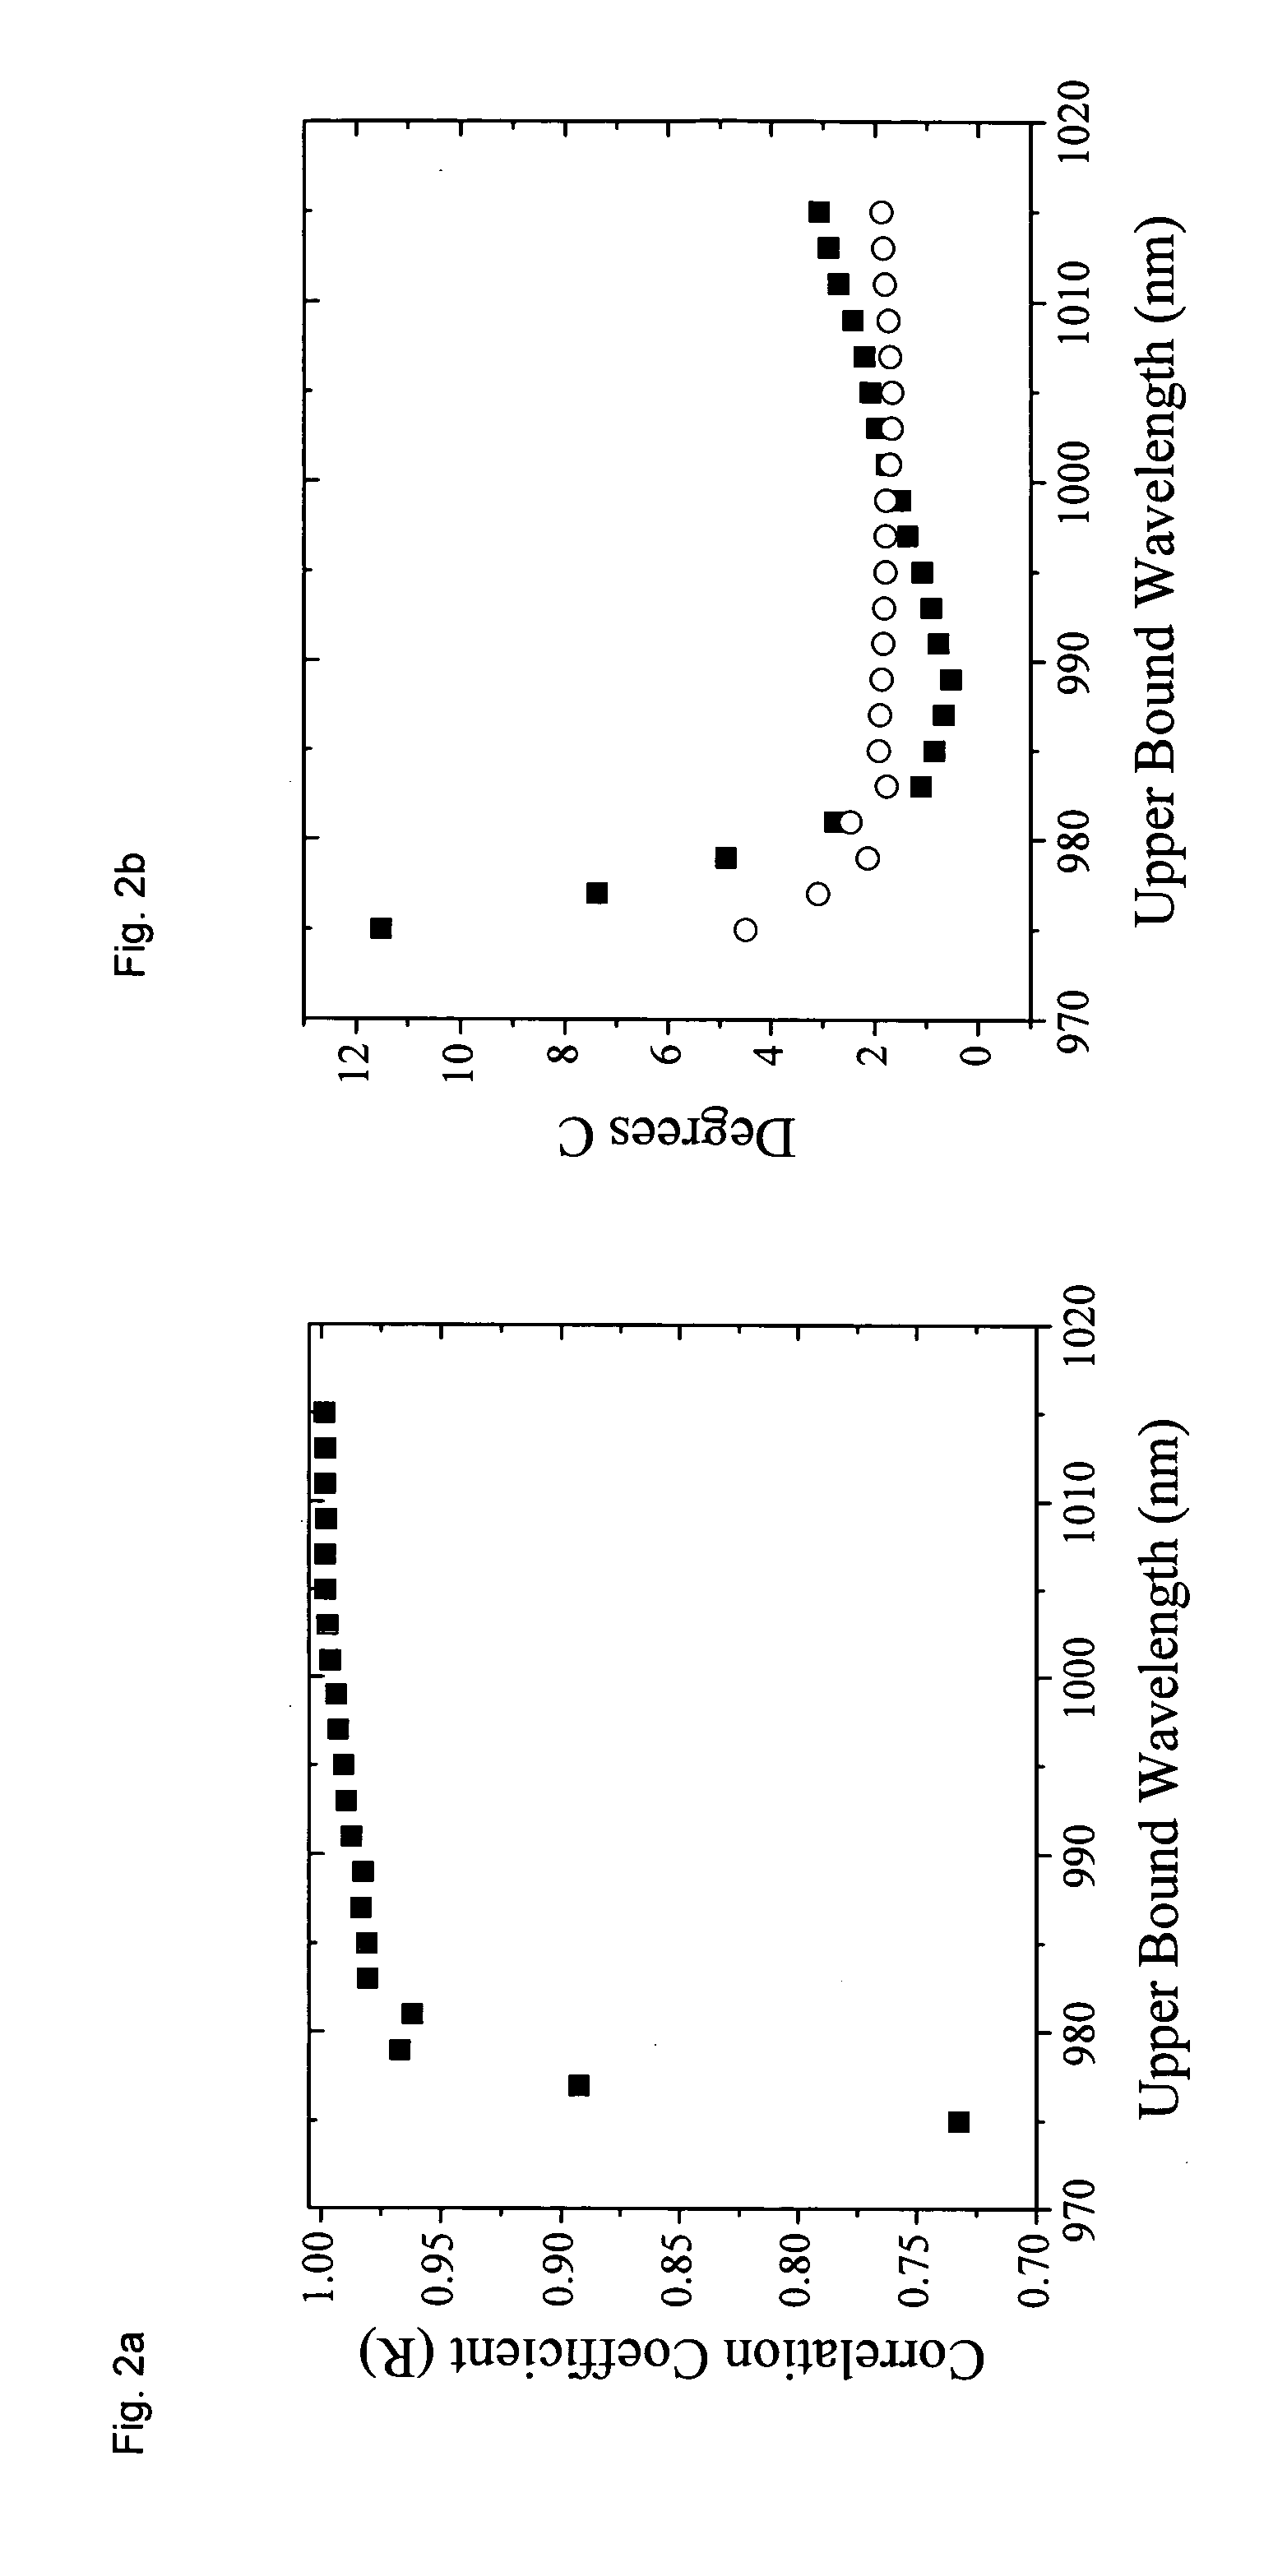 Apparatus and method for monitoring deep tissue temperature using broadband diffuse optical spectroscopy